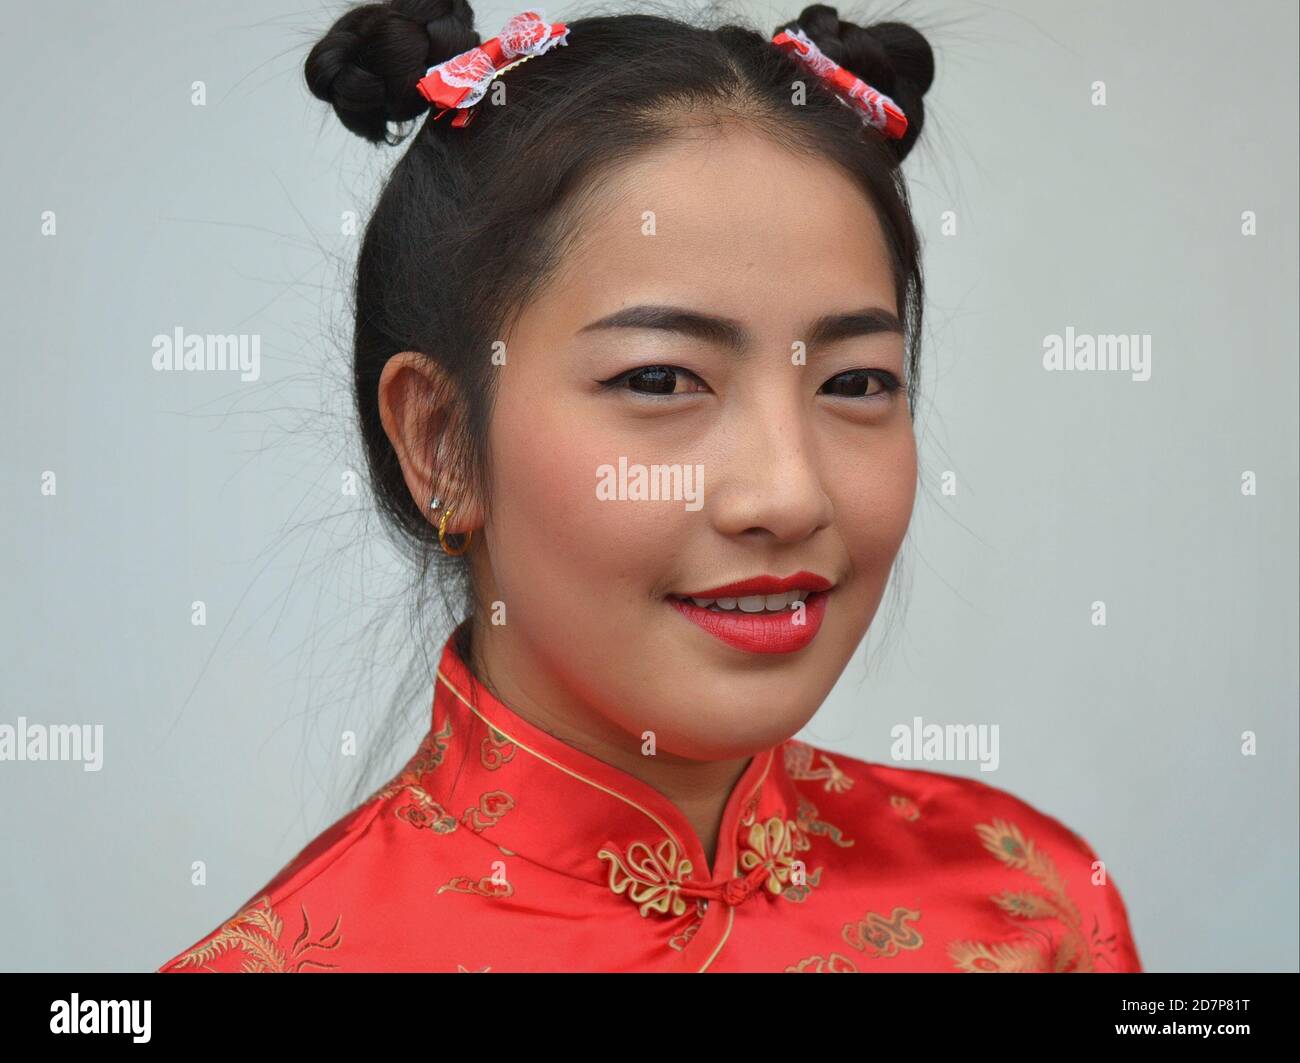 Young Thai Chinese woman with trendy contact lenses and traditional Chinese double side buns wears a red Chinese dress and smiles for the camera. Stock Photo